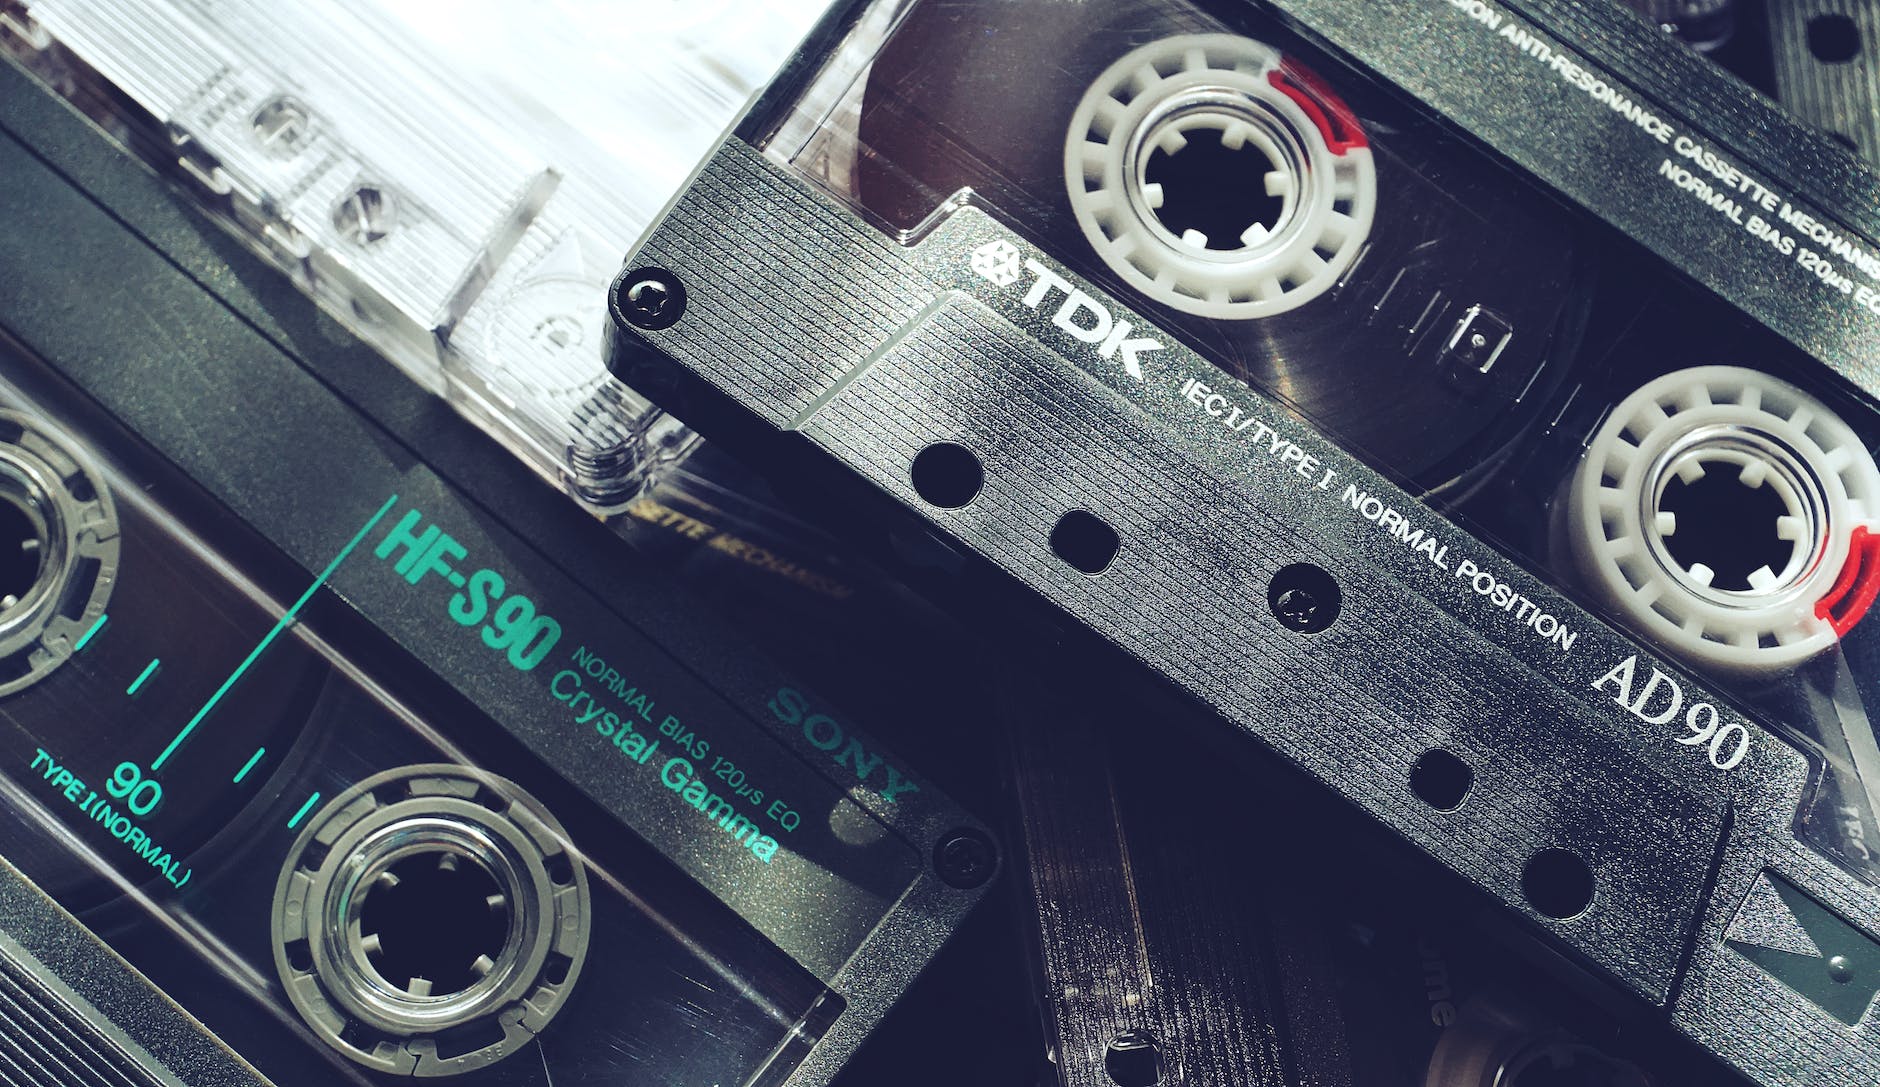 black audio tapes in close up view